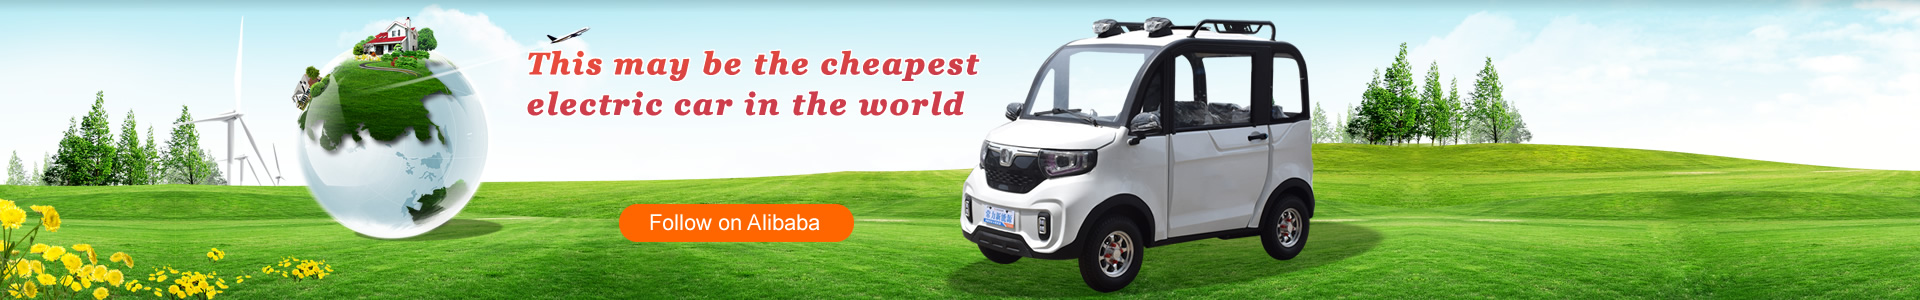 This may be the cheapest electric car in the world.